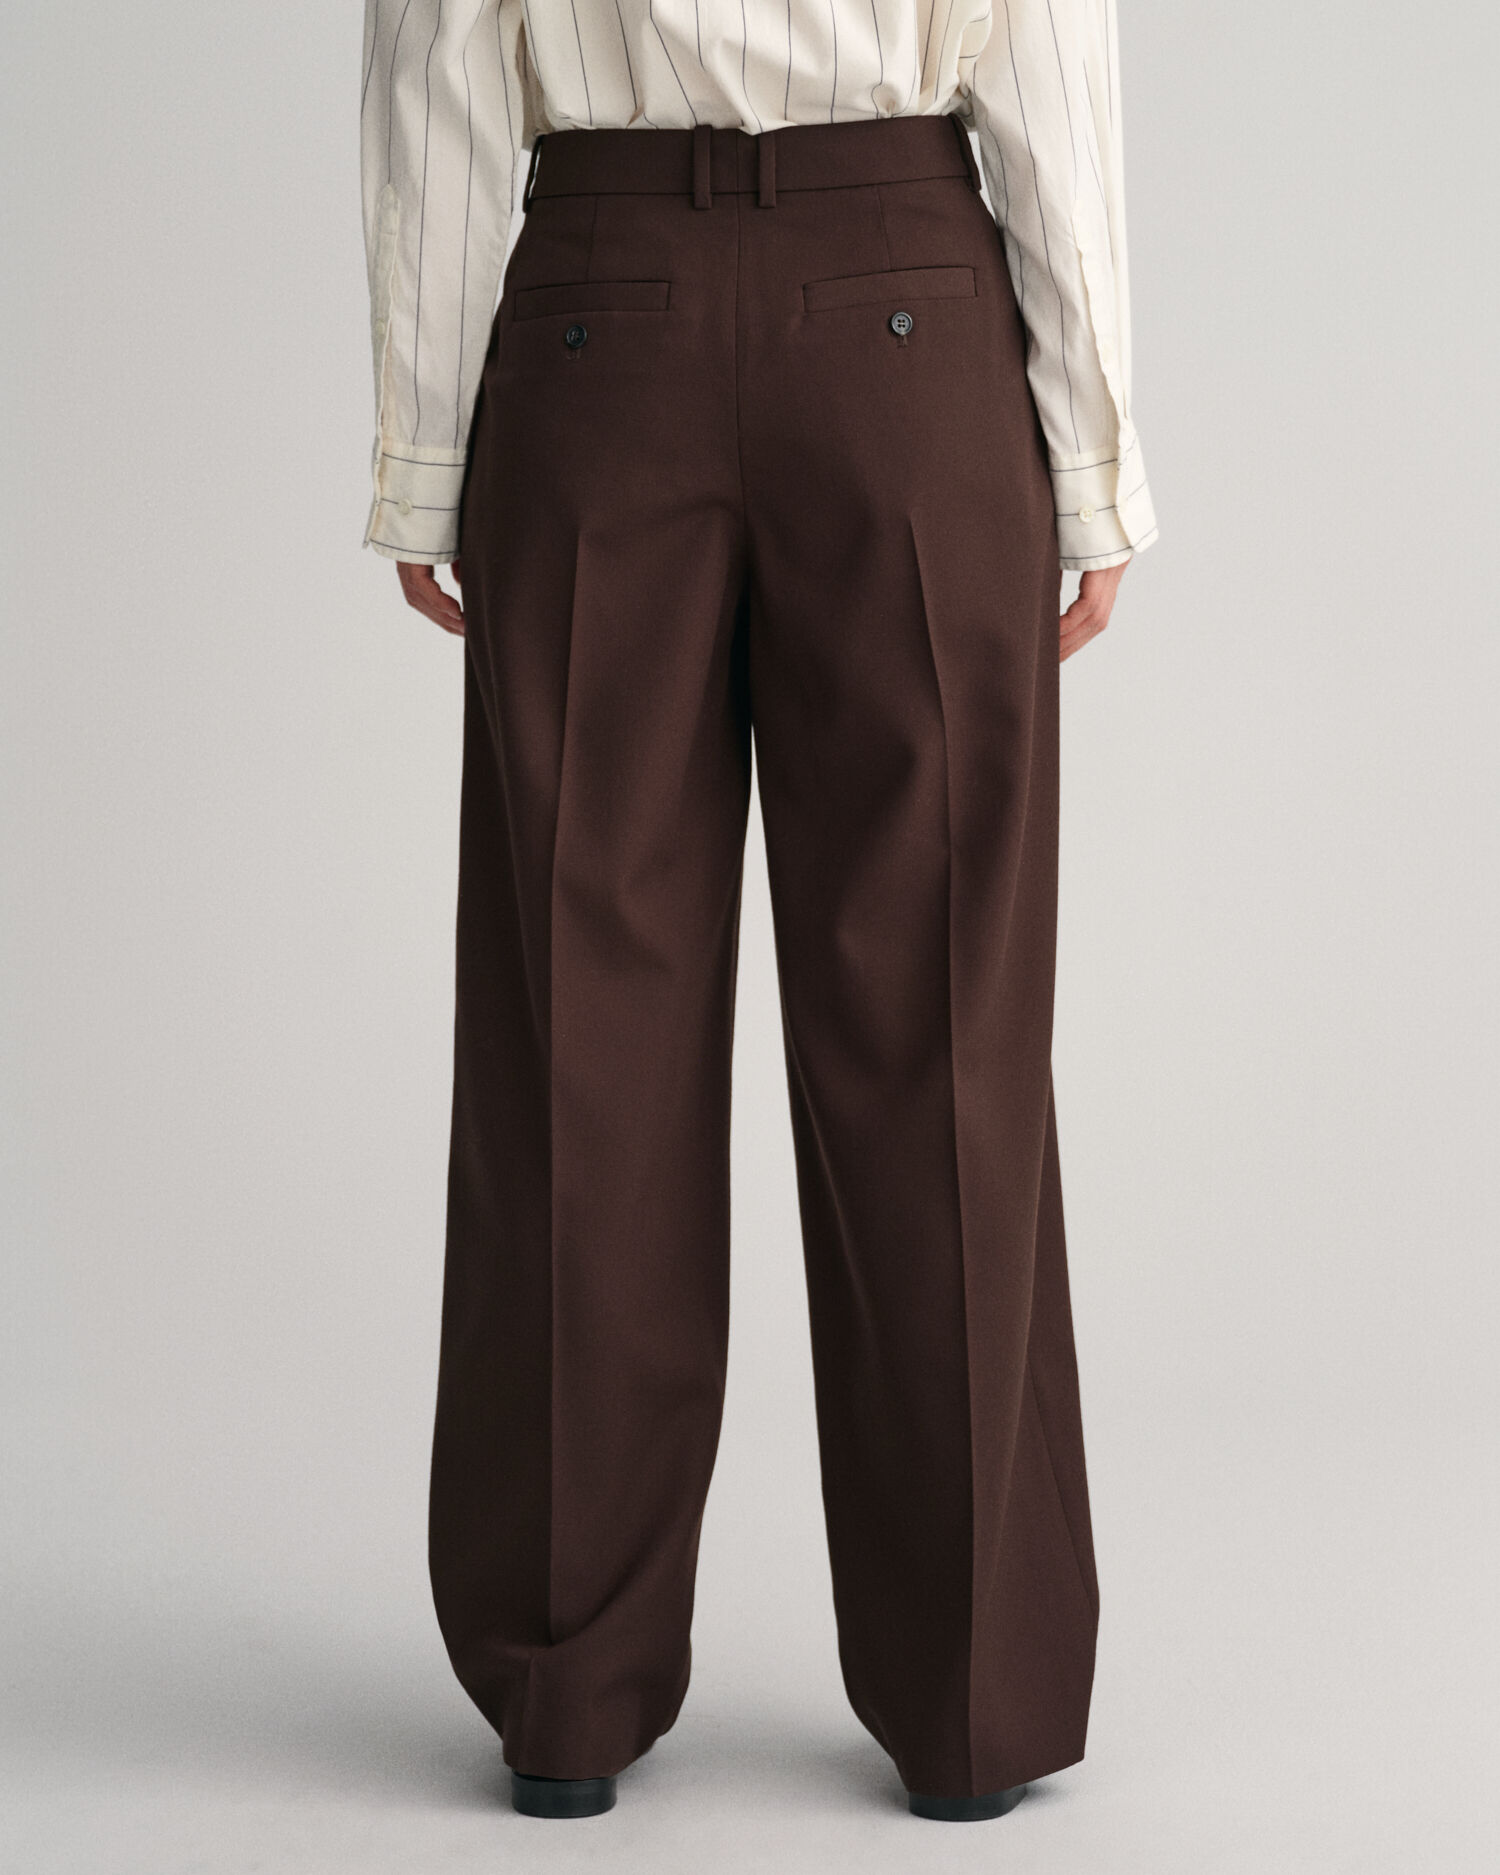 Relaxed Fit Tapered Leg Wool Pants